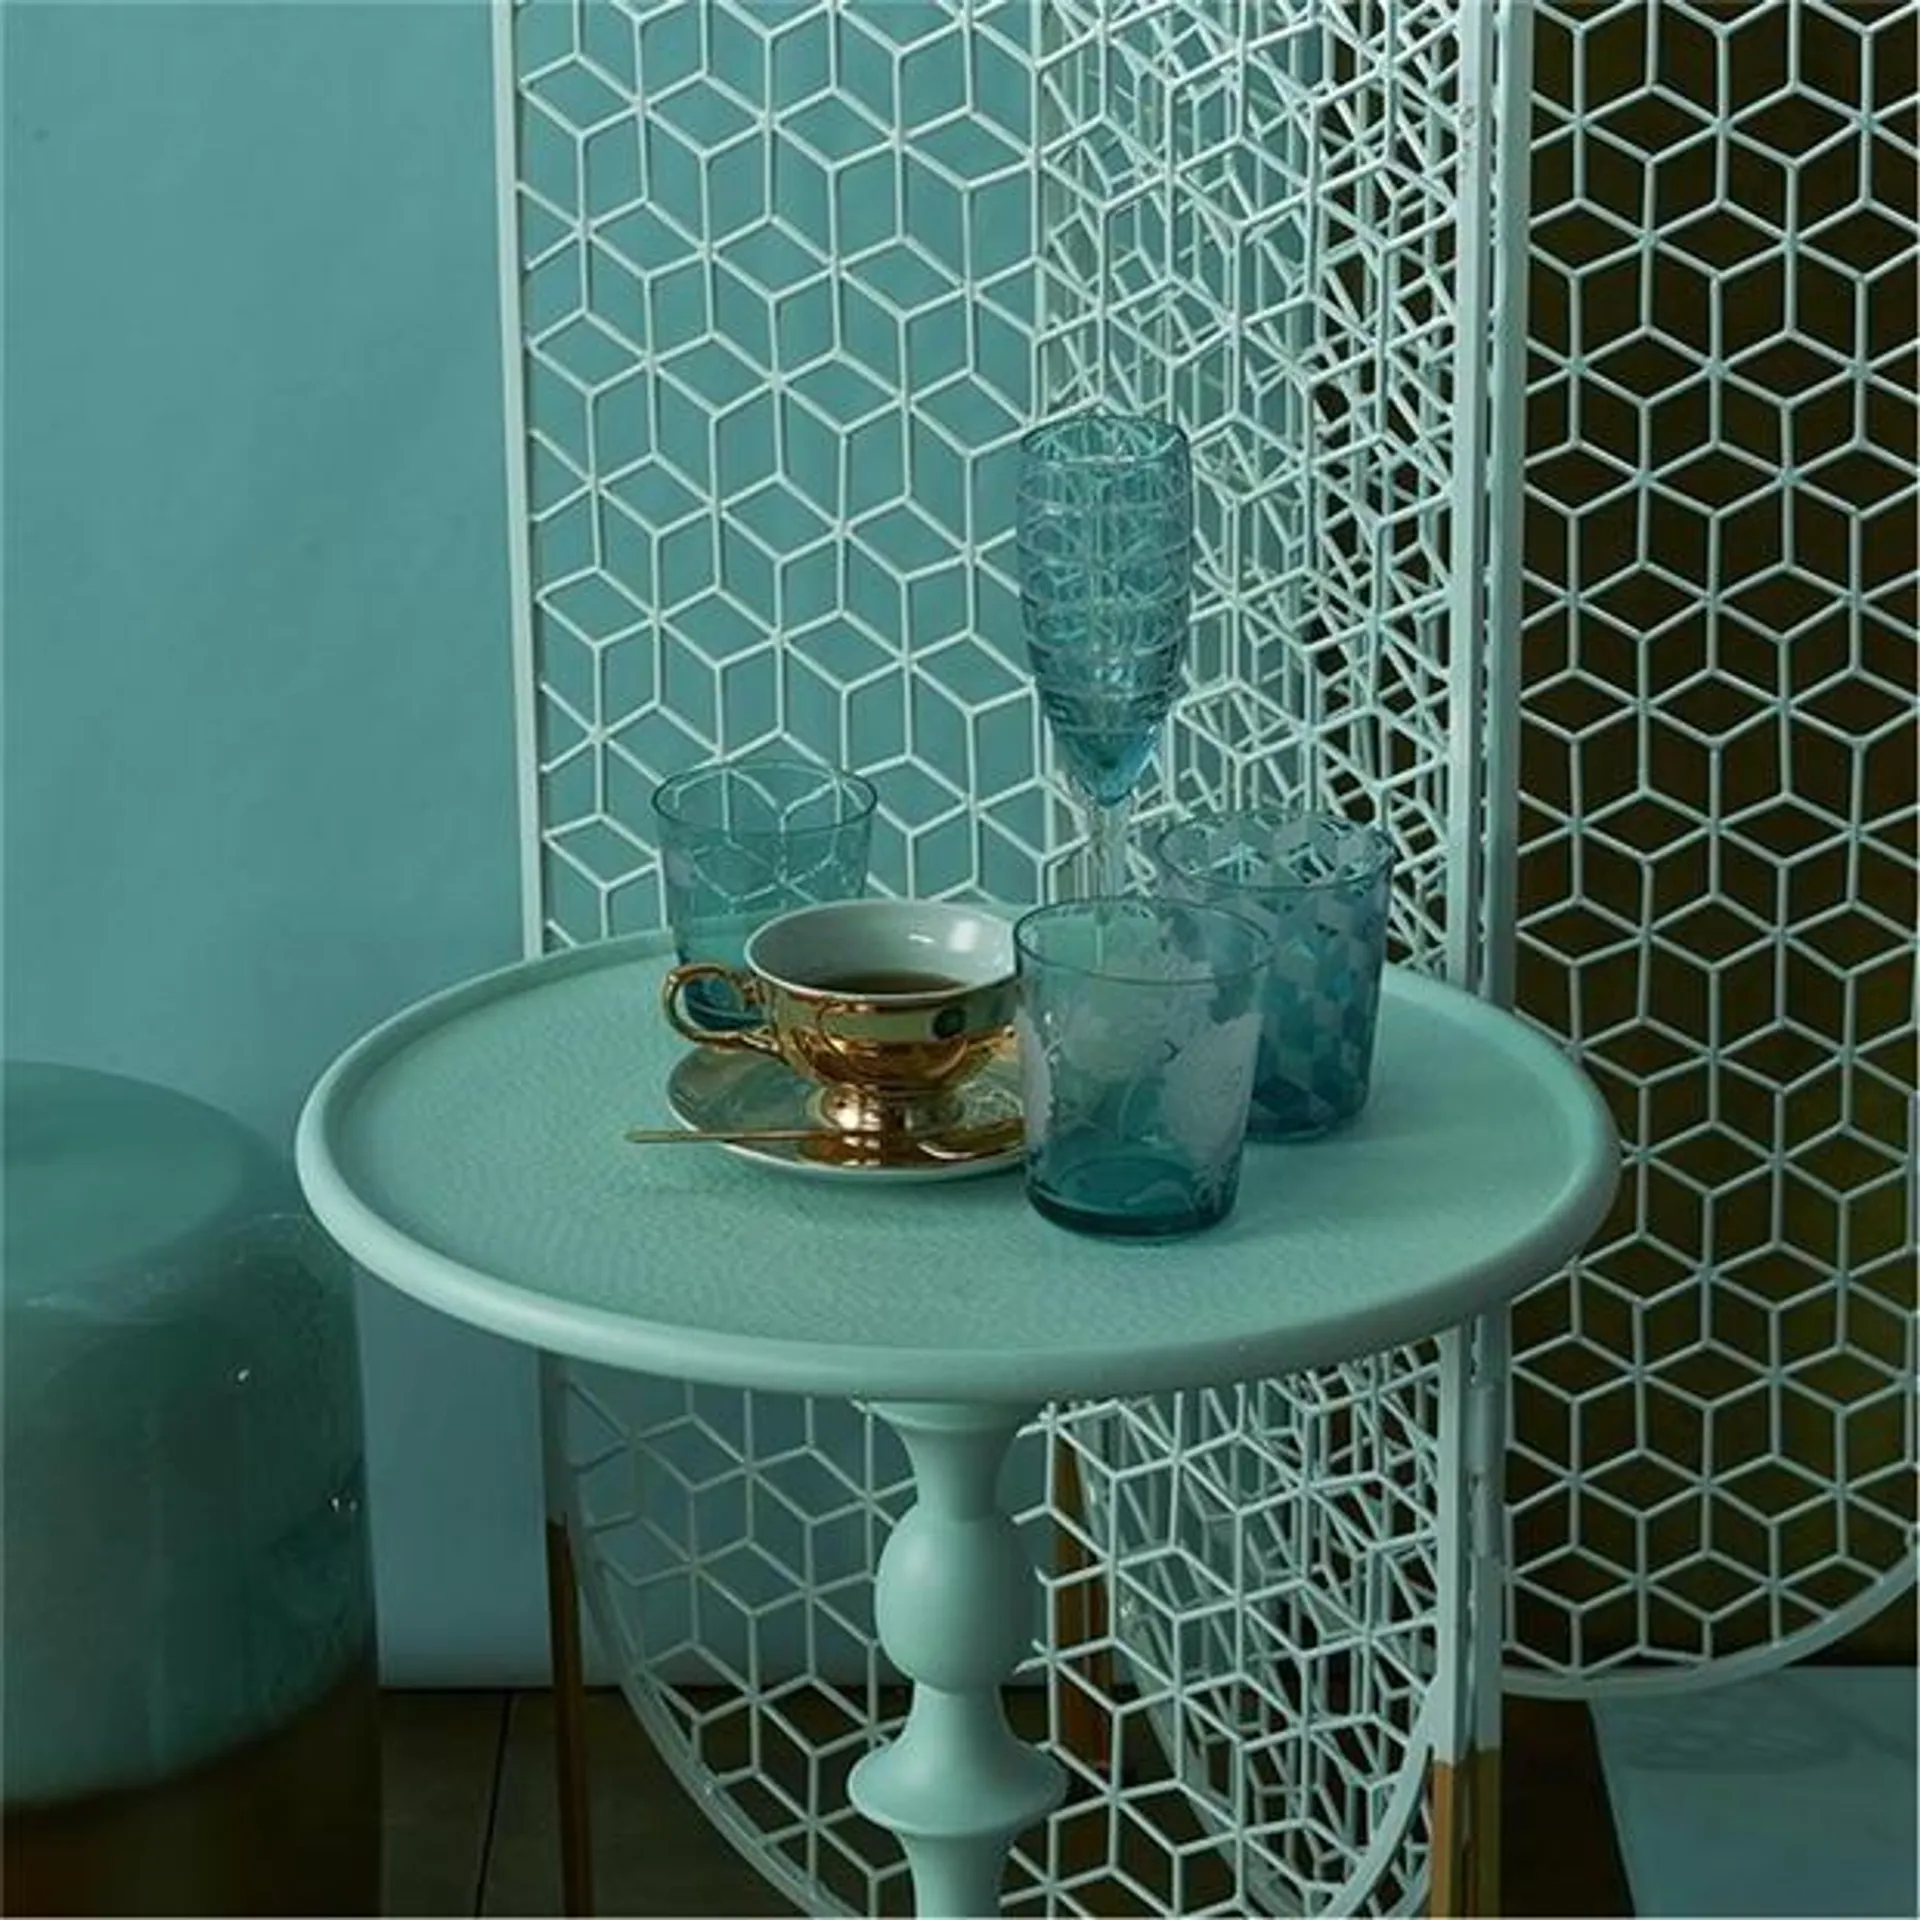 Classic Side Table - Mint Green